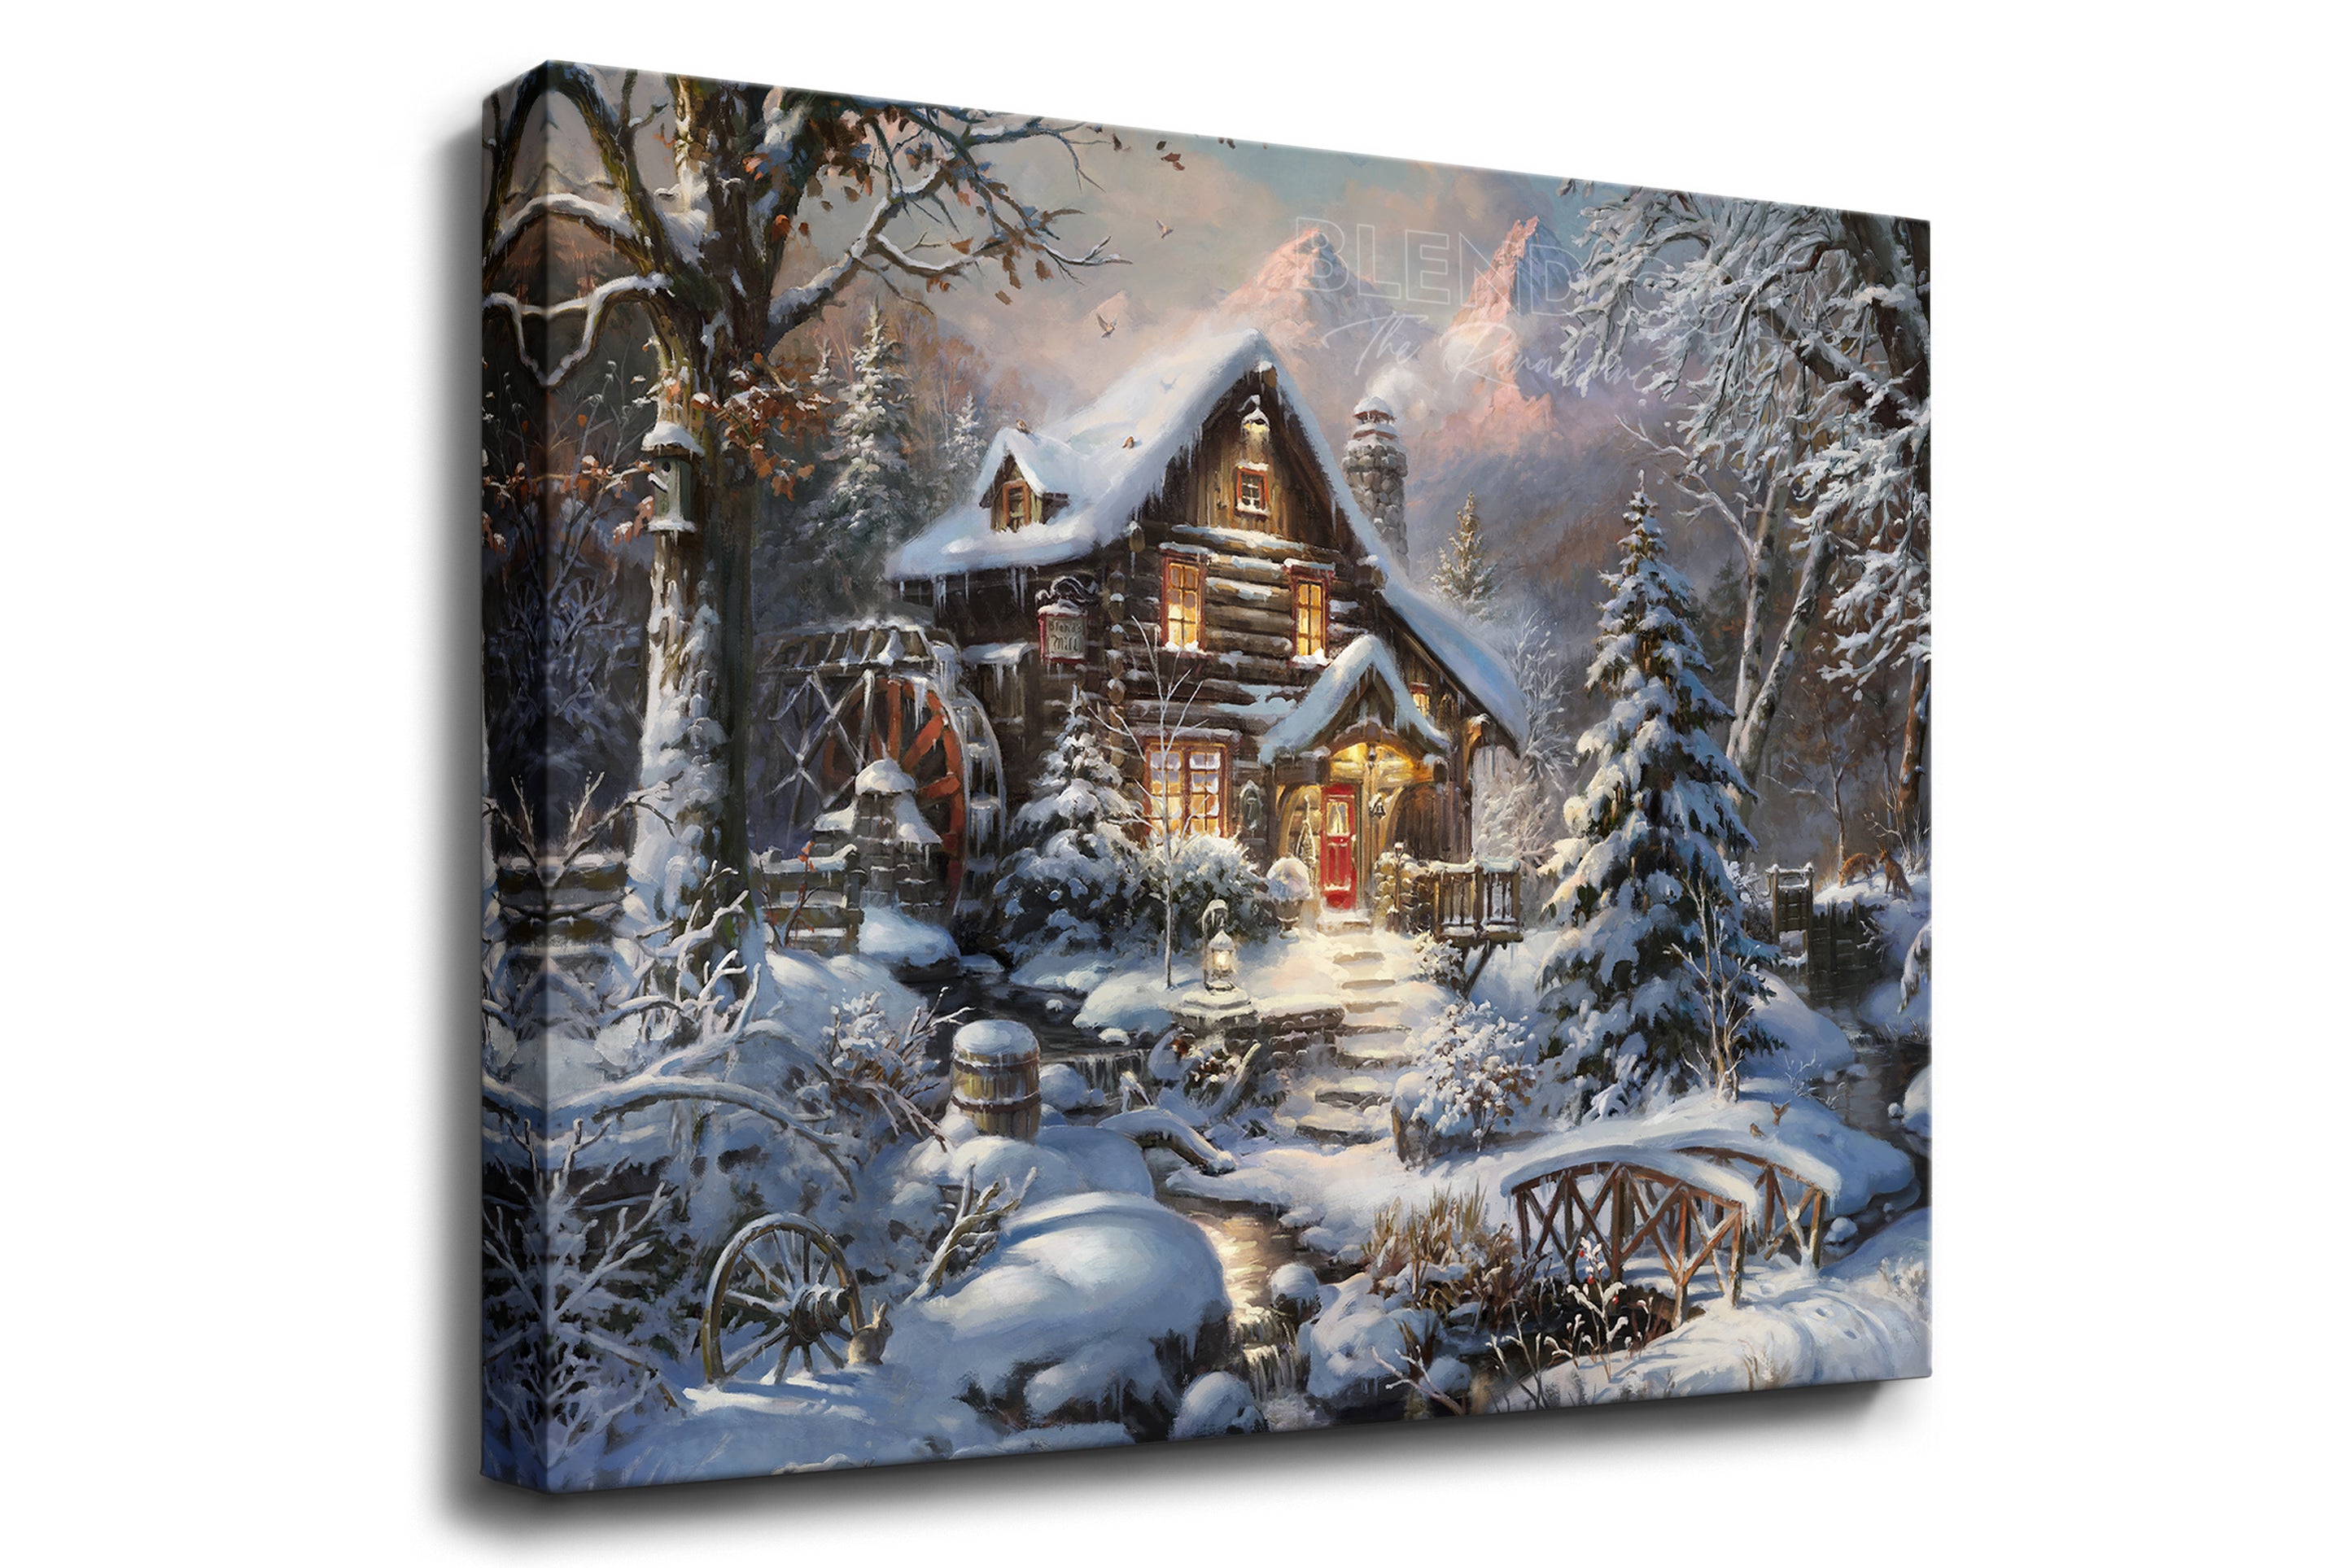 Silence of The First Snow - Blend Cota Art Print on Canvas - Blend Cota Studios painting hanging on white wall